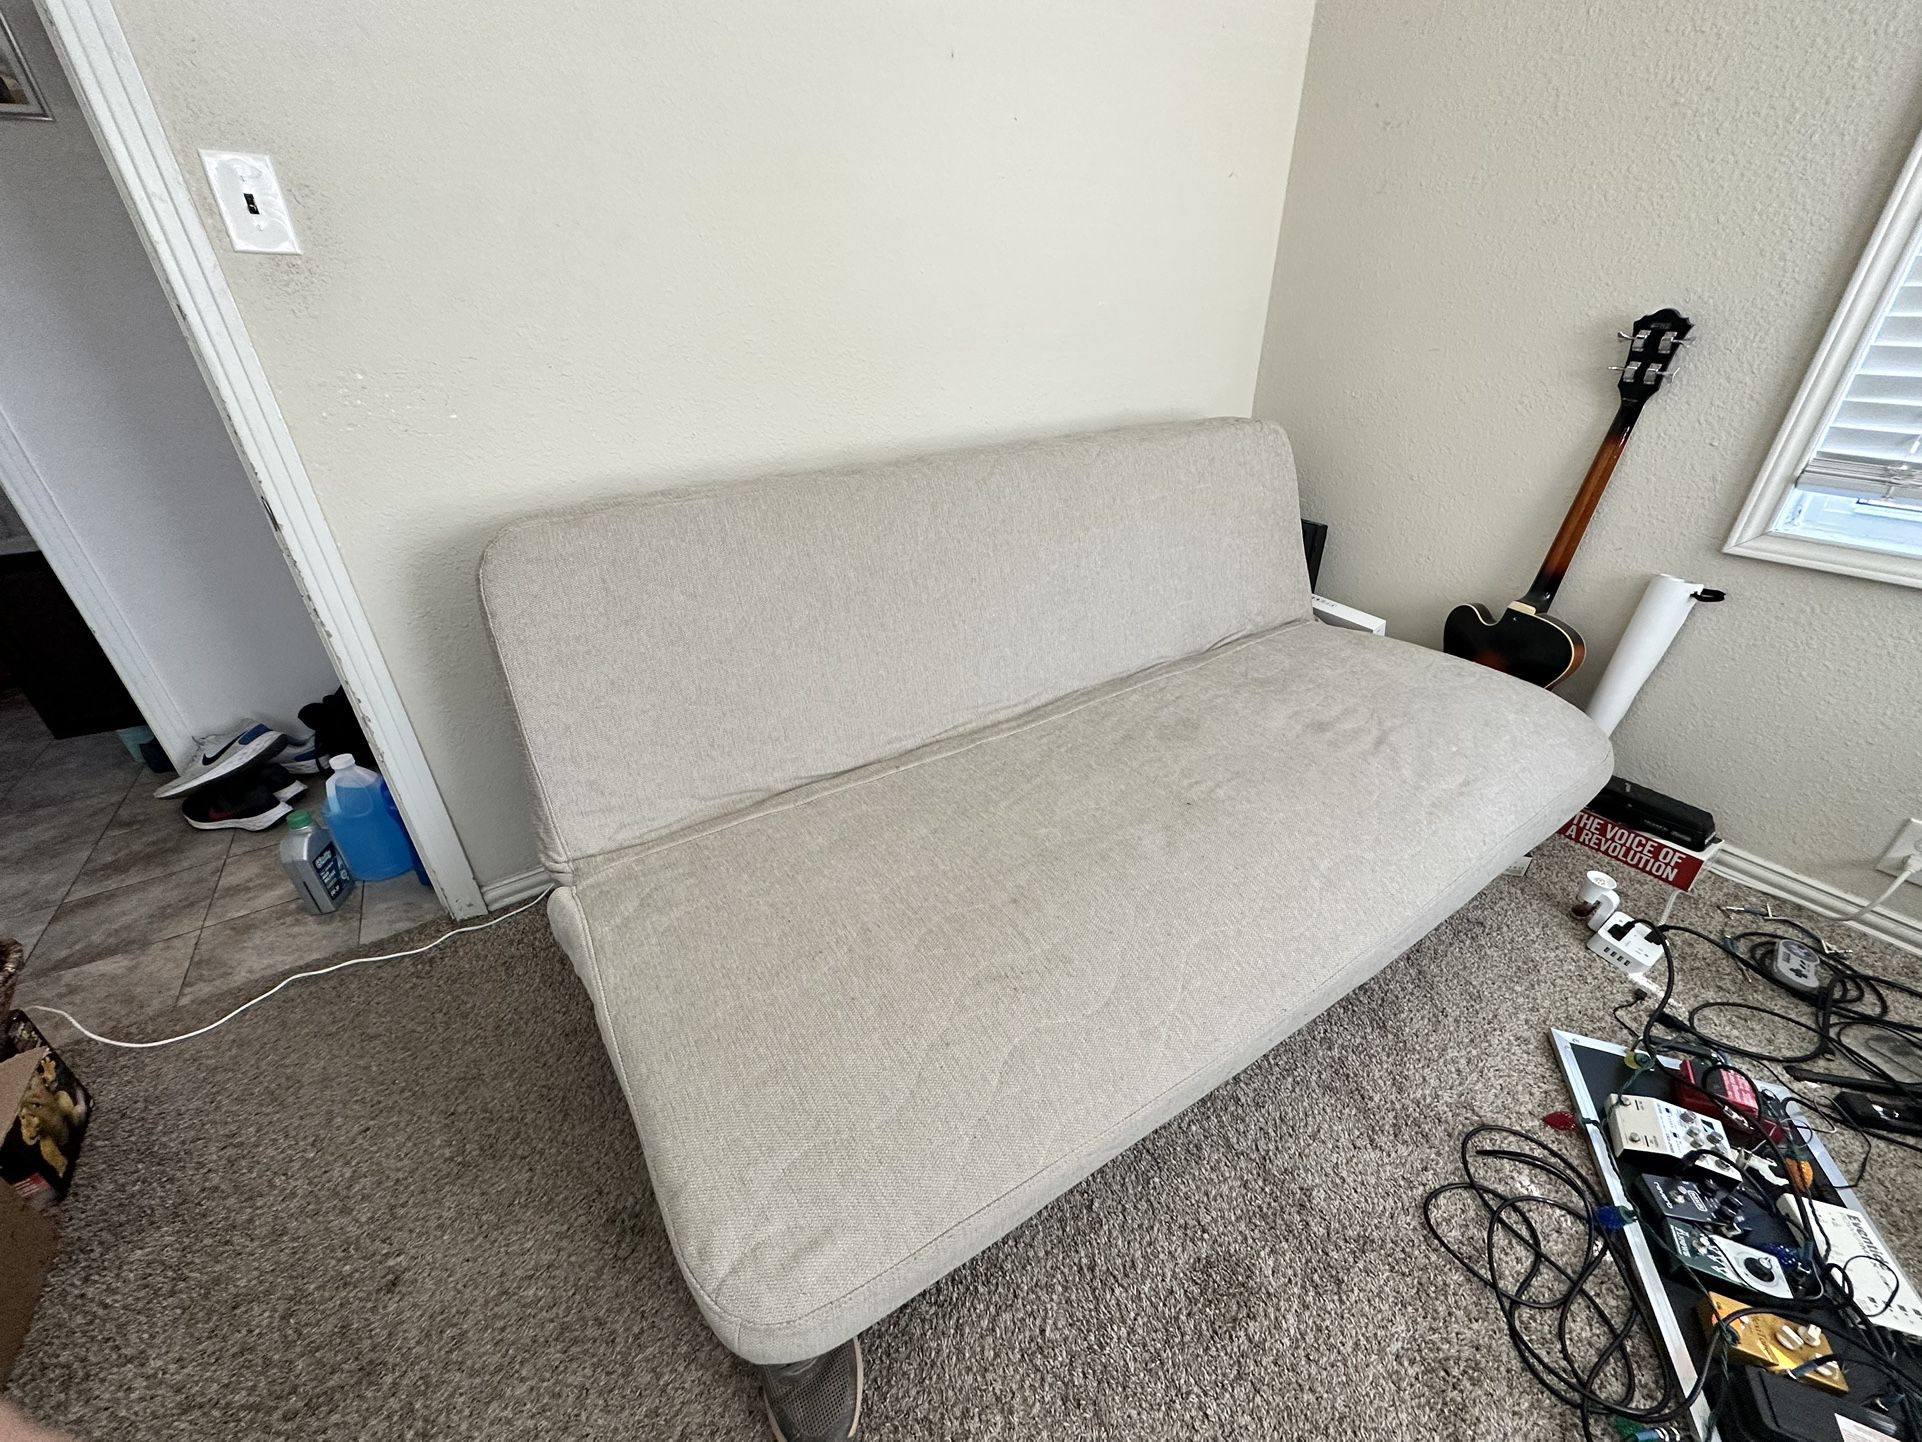 IKEA Sleeper Couch Porch Pick Up